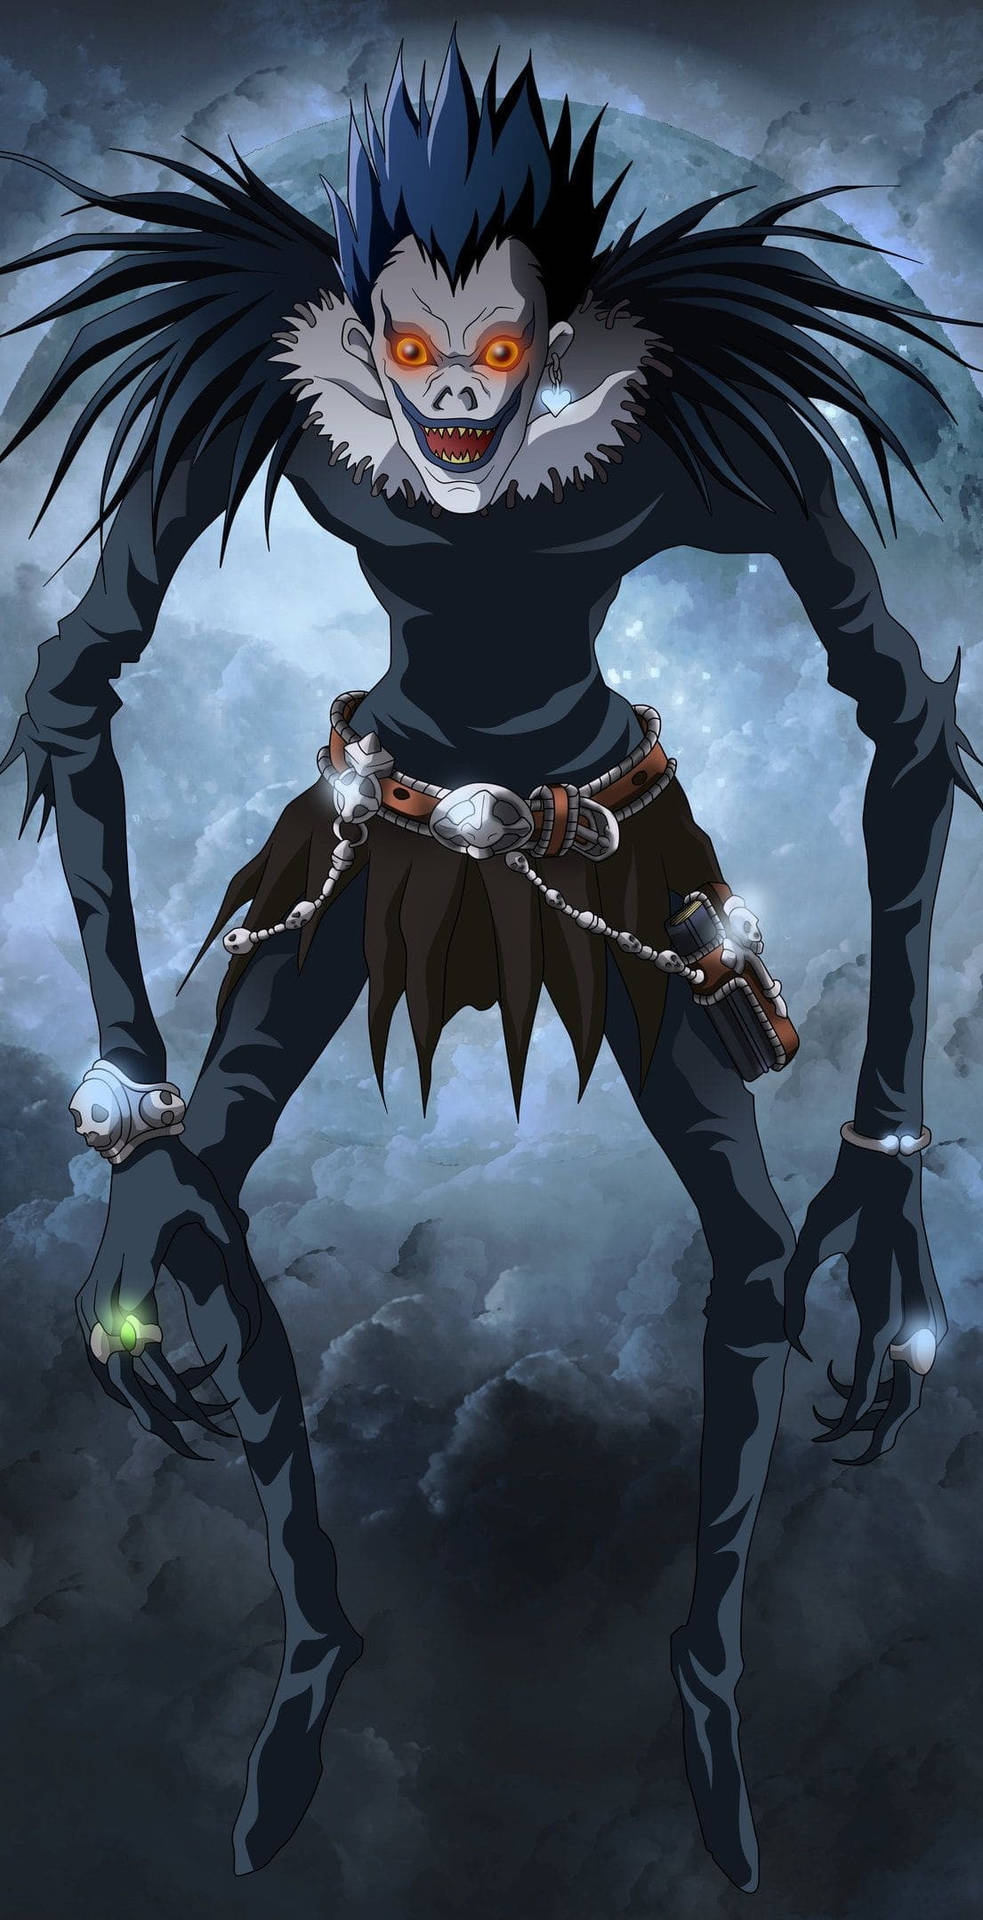 Wallpaper - Flyvende Shinigami Death Note iPhone tapet Wallpaper